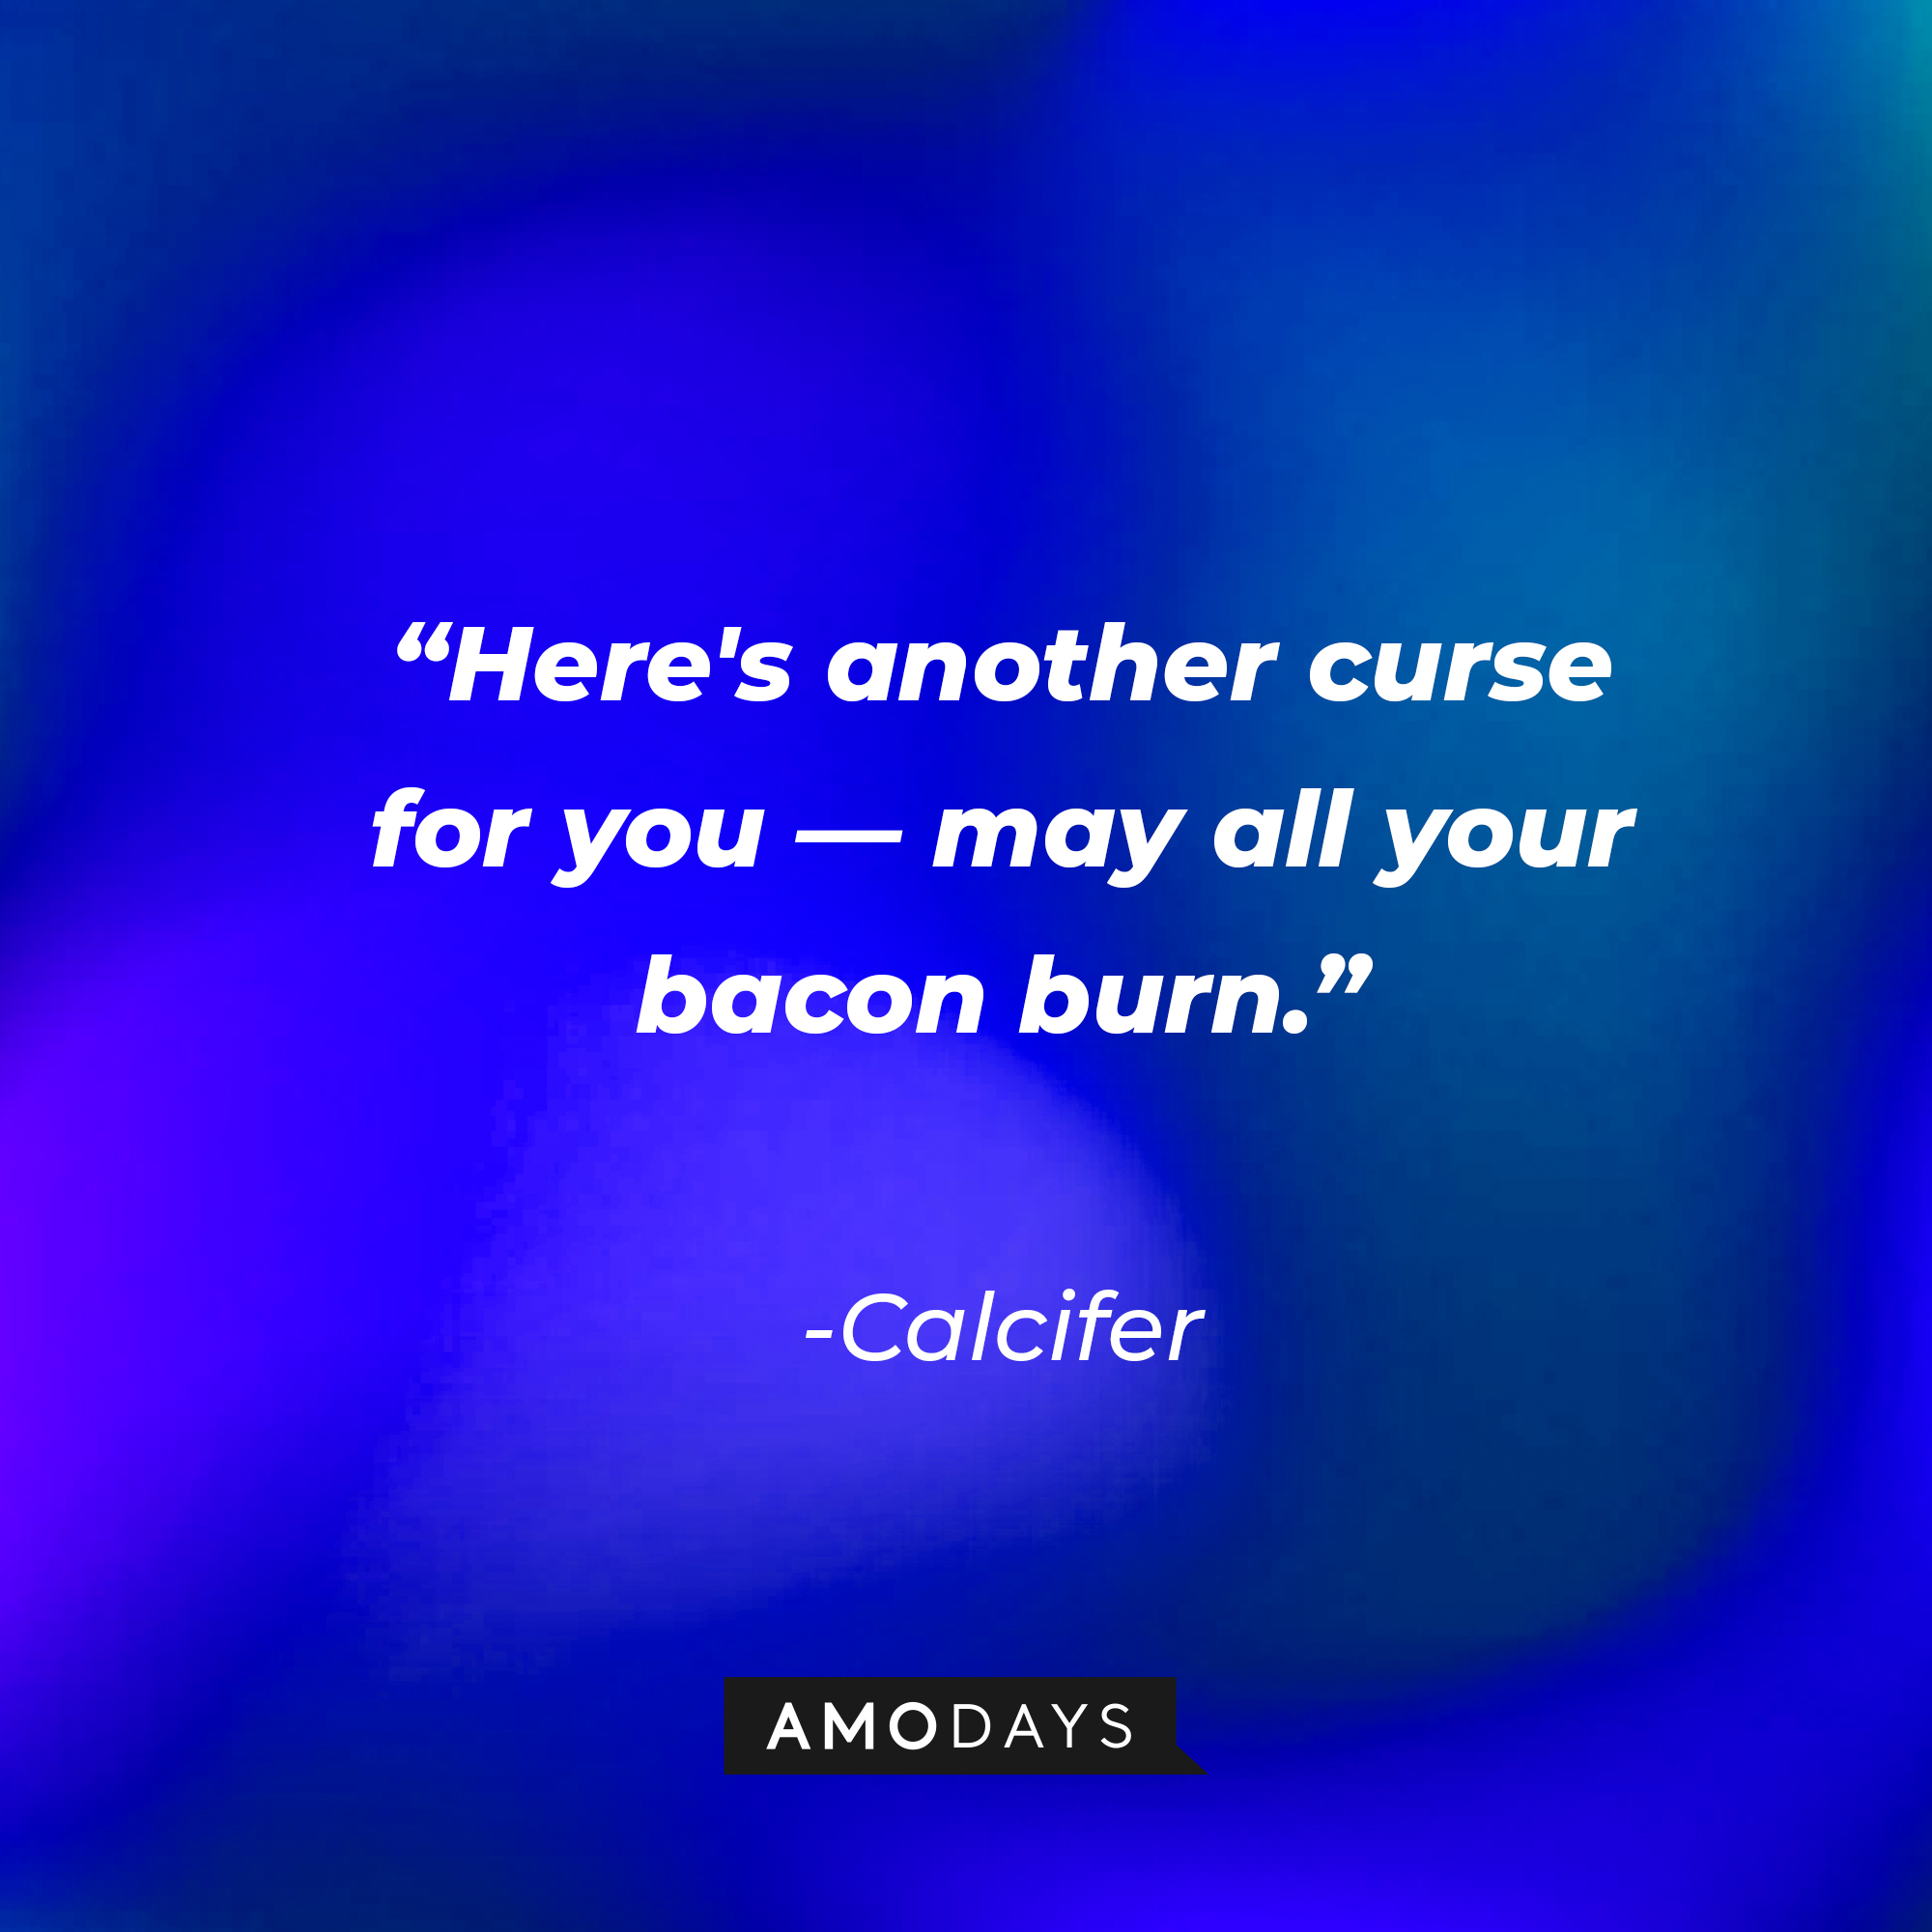 Calcifer’s quote: “Here's another curse for you—may all your bacon burn.” | Source: AmoDays